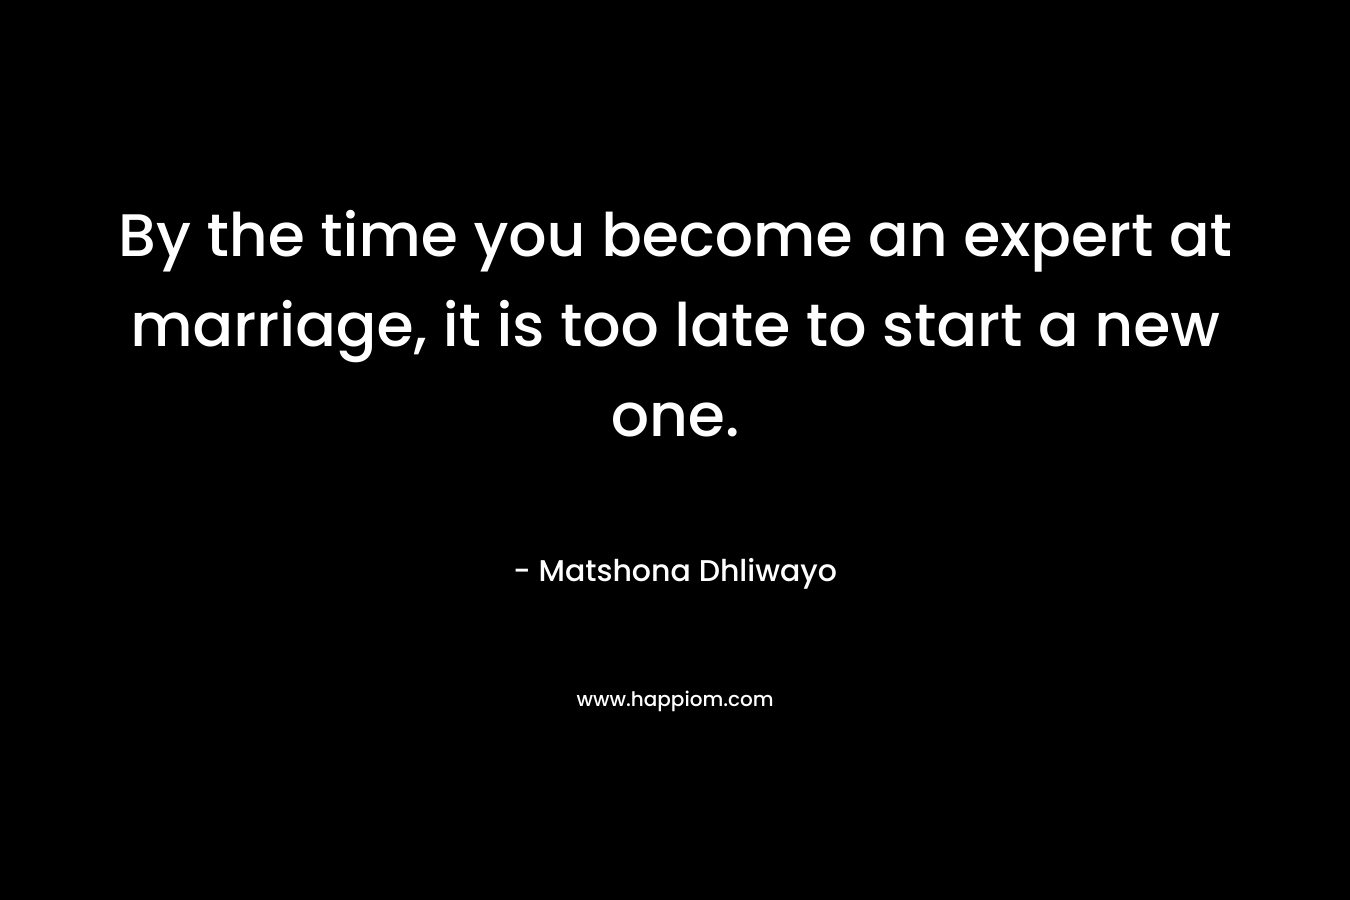 By the time you become an expert at marriage, it is too late to start a new one.